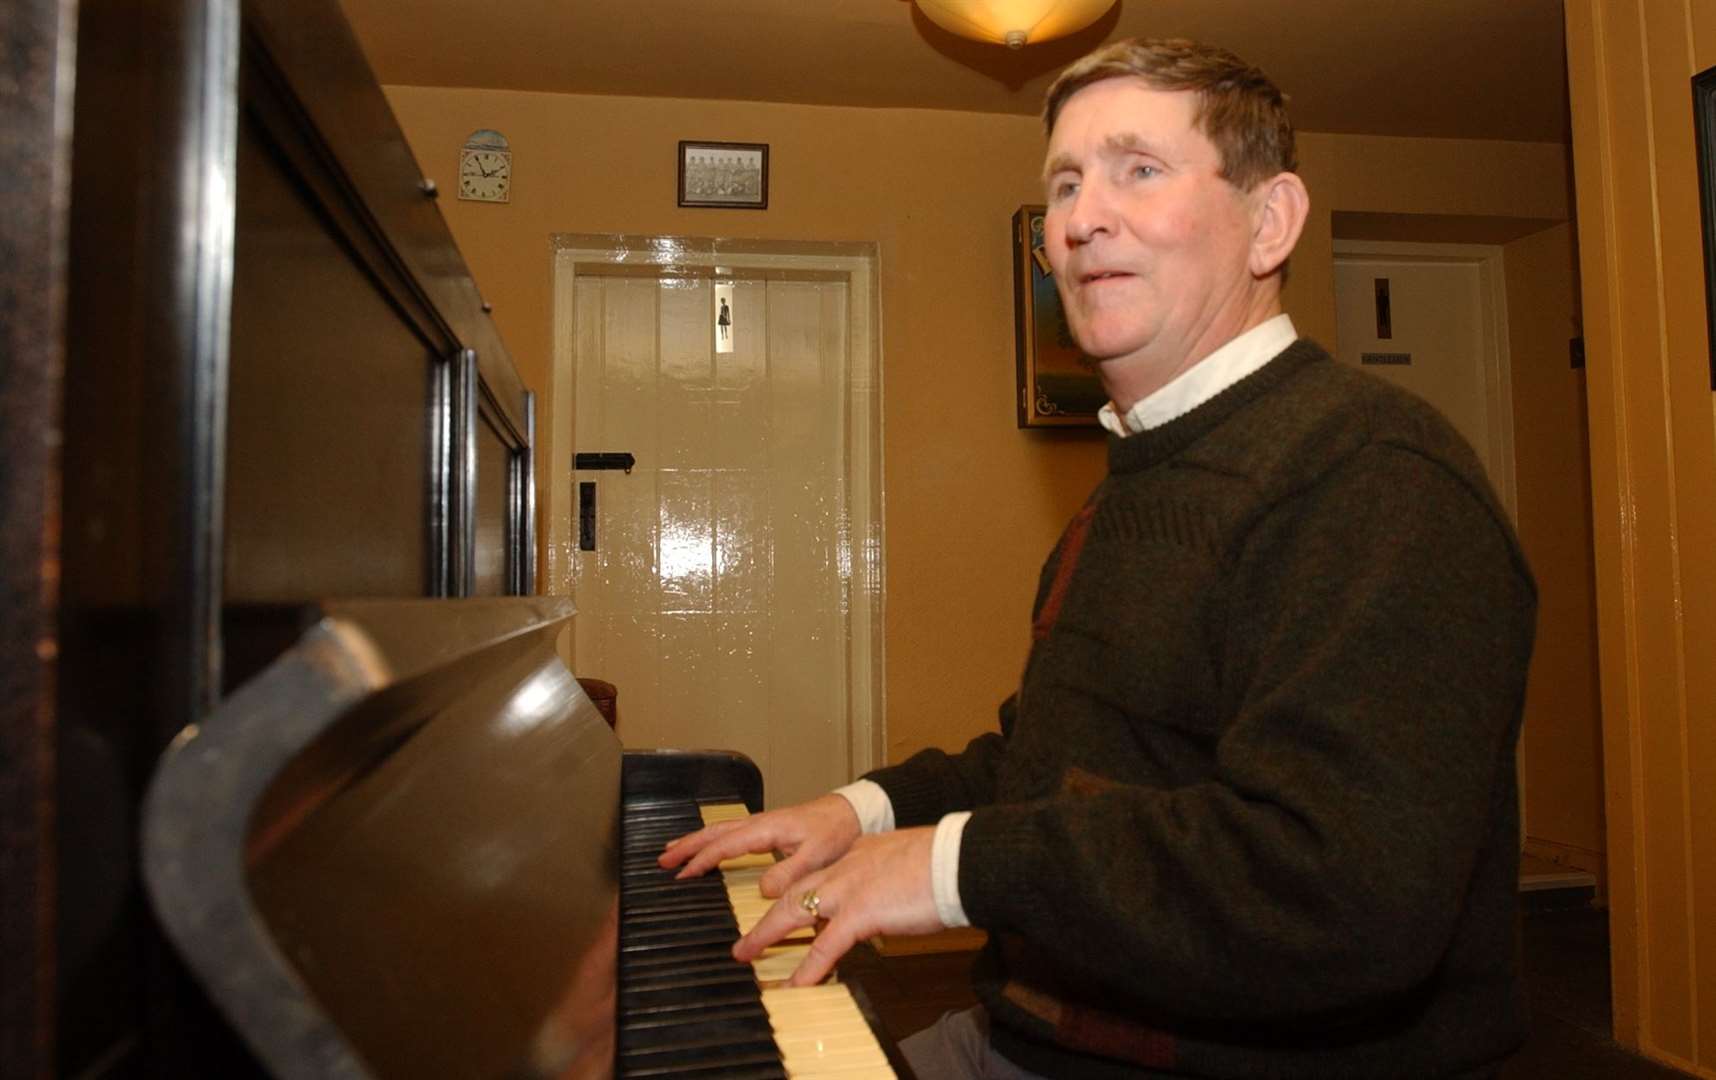 Colin Palmer played the piano non-stop for two hours in order to raise money for Ashford Citizens Advice Bureau in December 2002